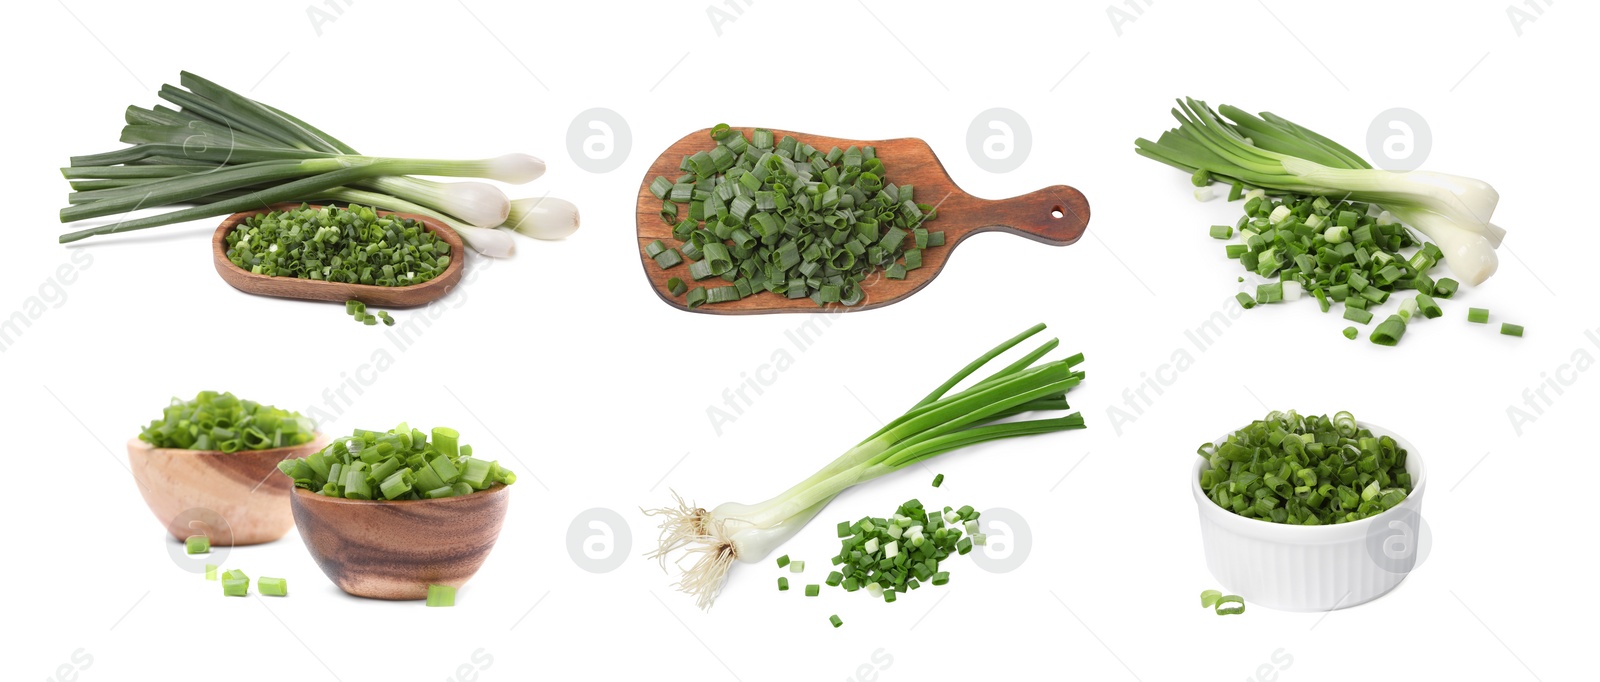 Image of Collage of chopped and whole green onions on white background